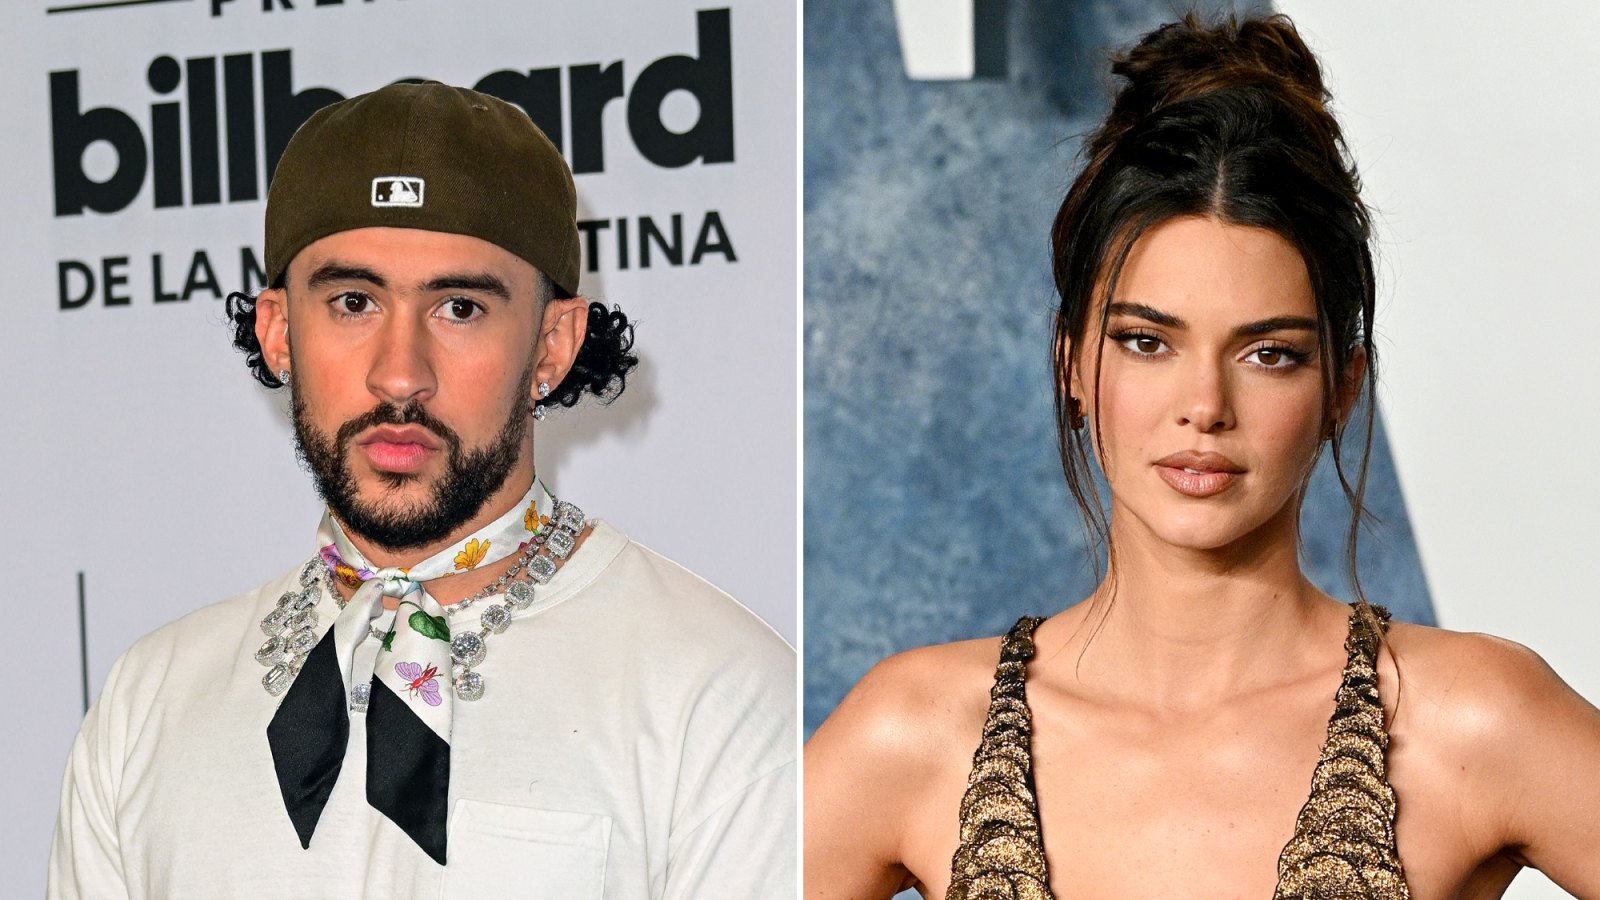 Bad Bunny Dodges Love Life Questions in New Music Video Weeks After Splitting From Kendall Jenner